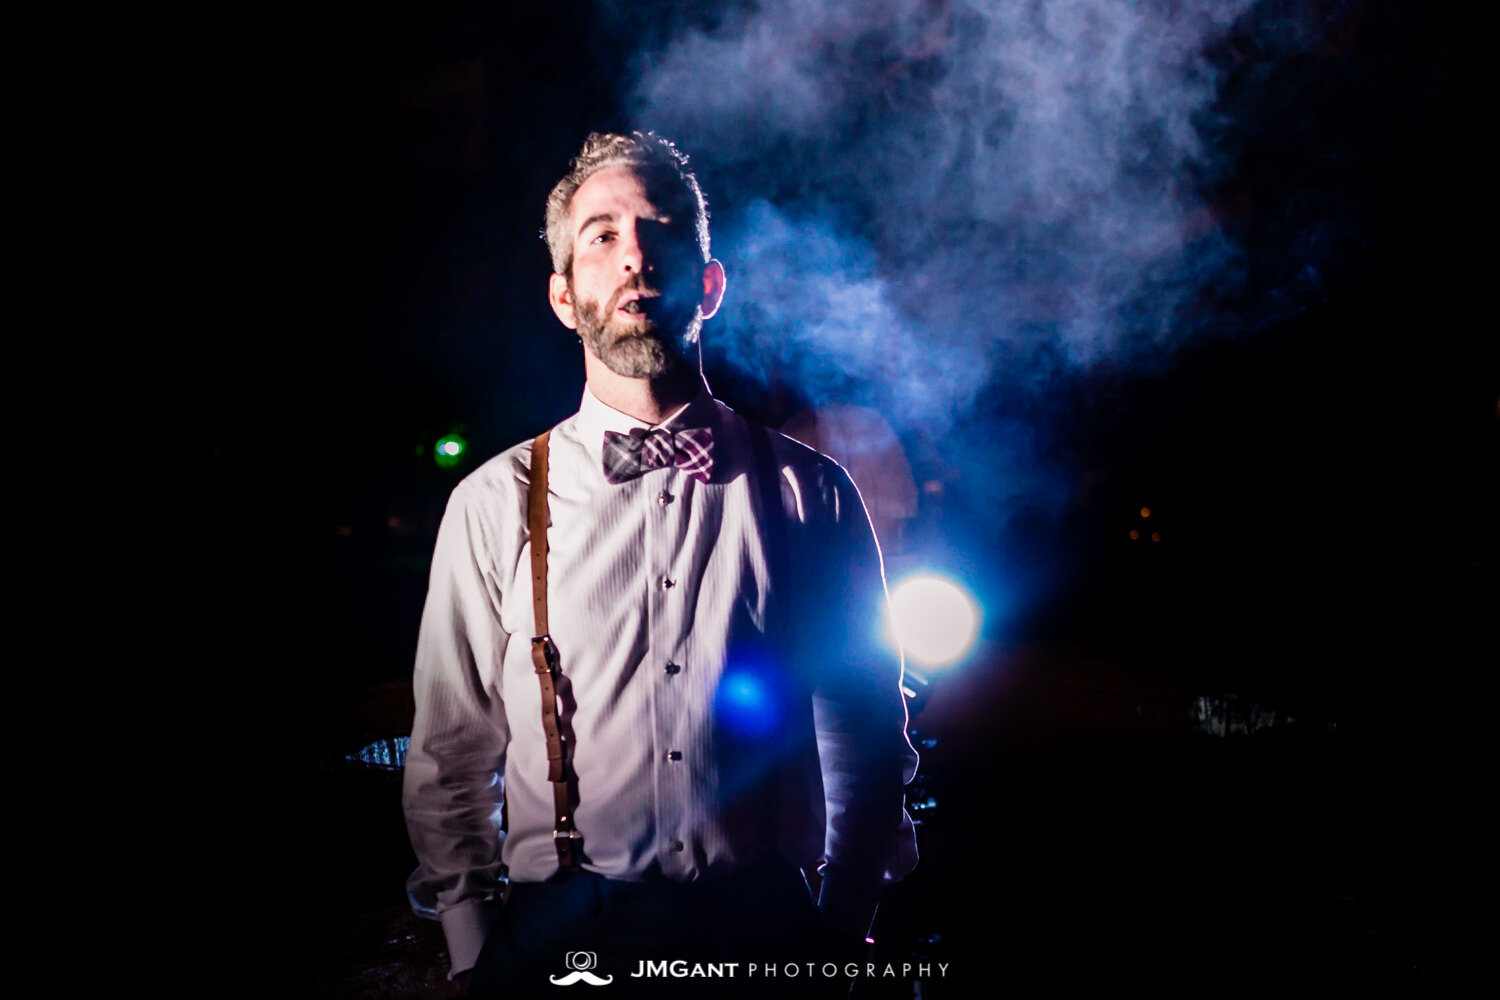  Incredible backlit cigar groom wedding portait, Winter Park, mountain wedding at the Lodge at Sunspot, photographed by JMGant Photography 